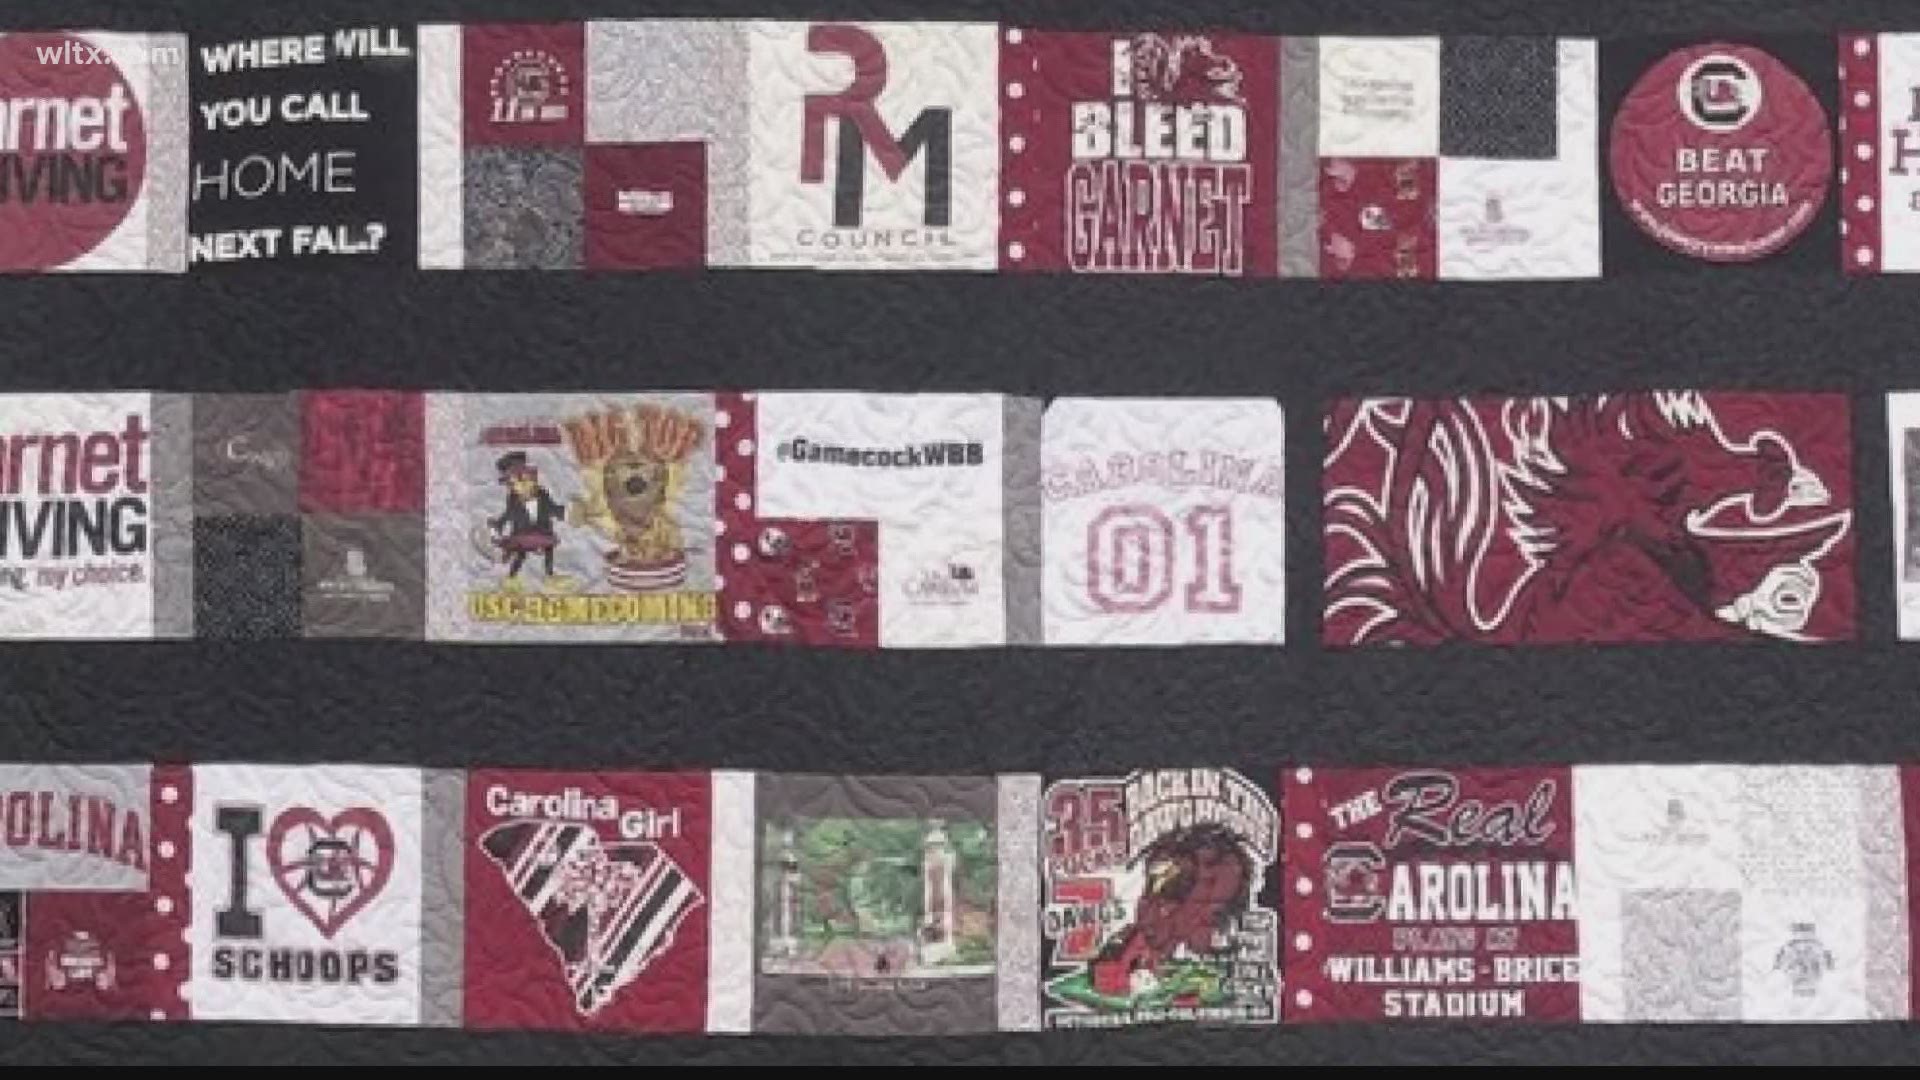 Blanket sewn from more than 75 t-shirts collected during attendance at University of South Carolina